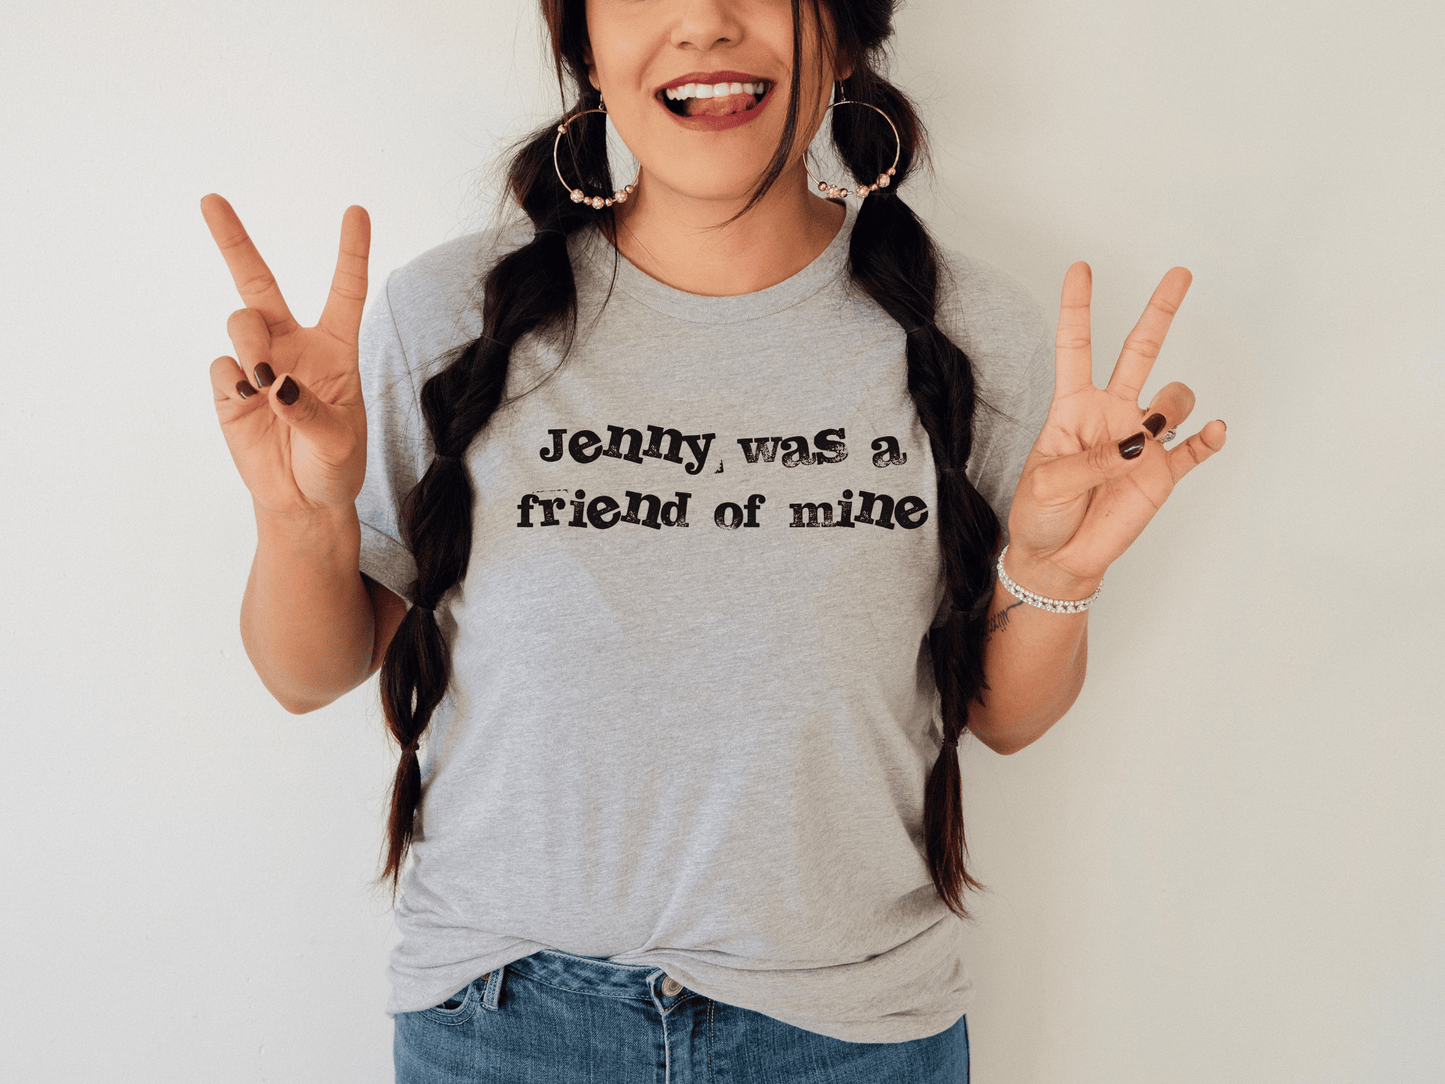 The Killers "Jenny was a Friend of Mine" T-Shirt in Athletic Heather on a female